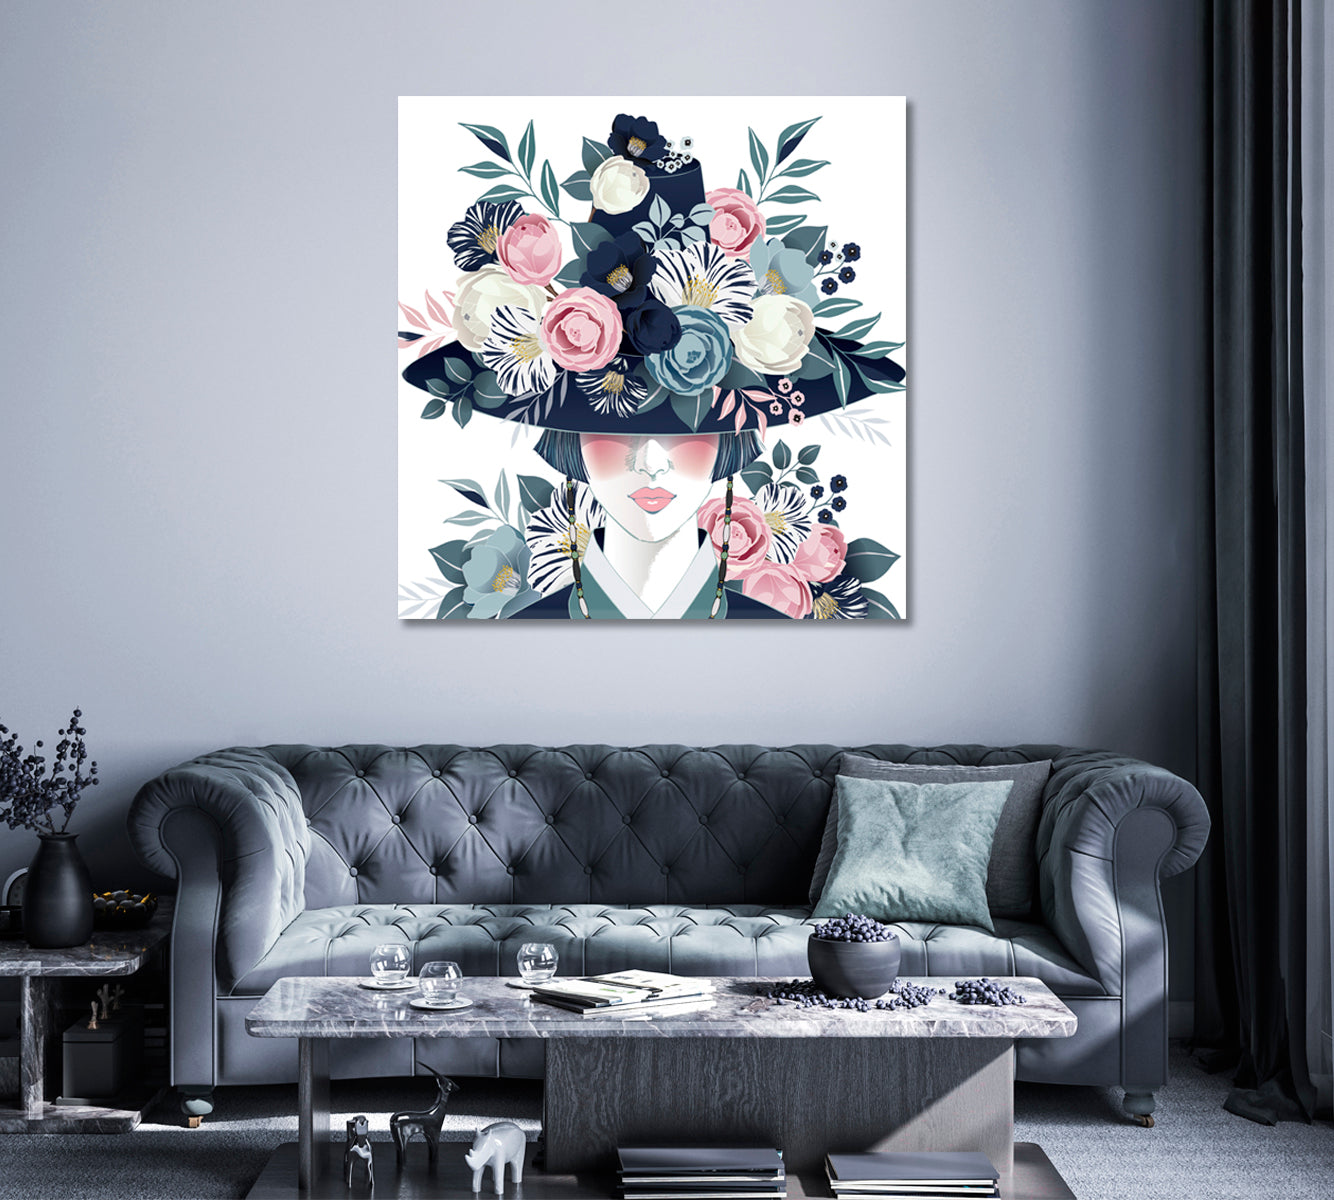 Woman with Flowers Canvas Print ArtLexy 1 Panel 12"x12" inches 